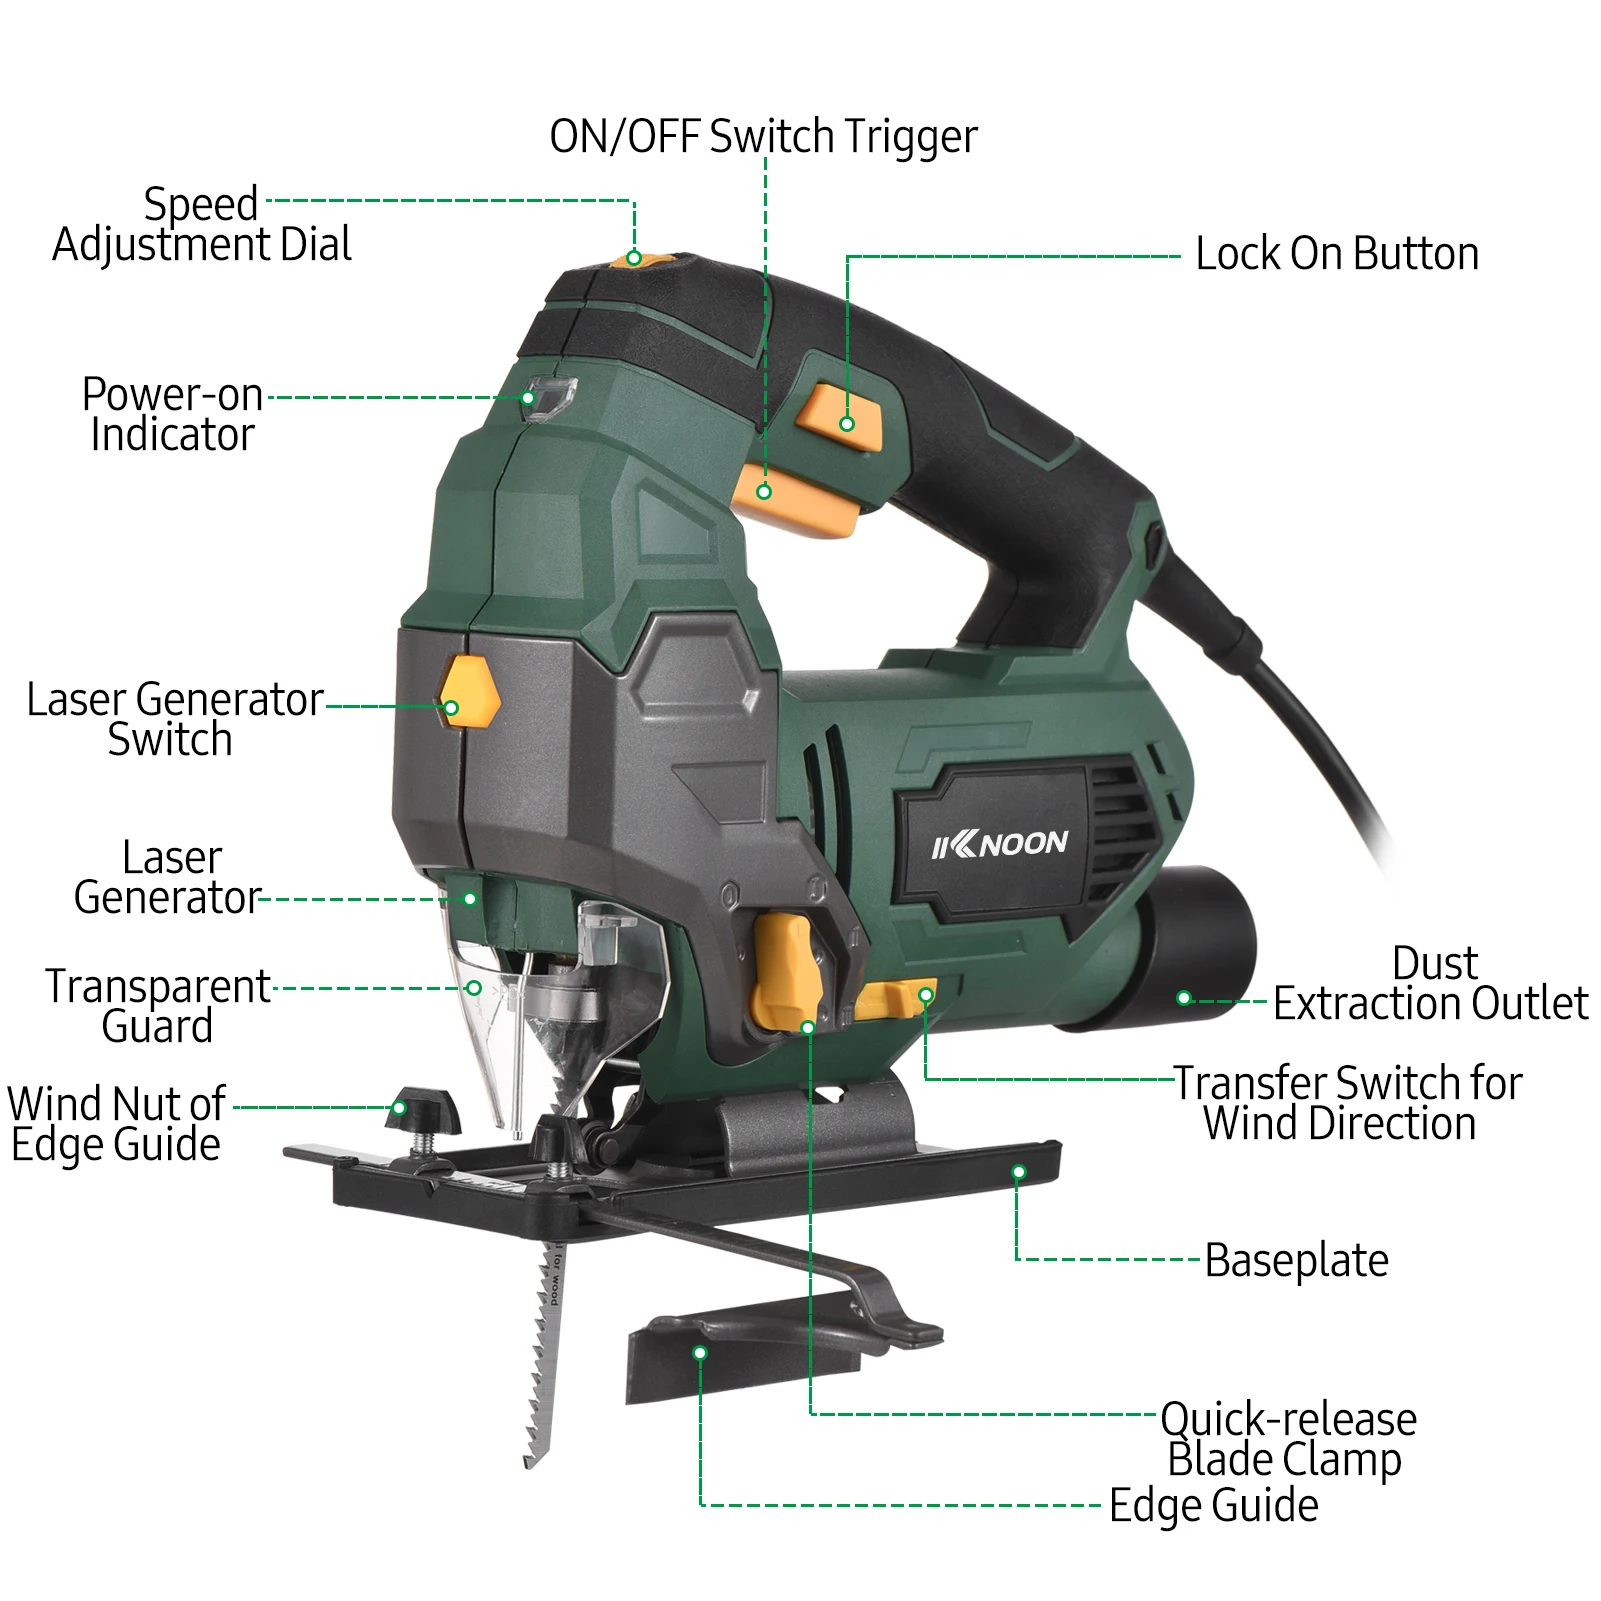 800W Jig Saw 6.5-Amp 3000 SPM 6-Speed with Laser ±45° Bevel Cutting 4 Orbital Settings Pure Copper Motor Power Corded 6 Blades